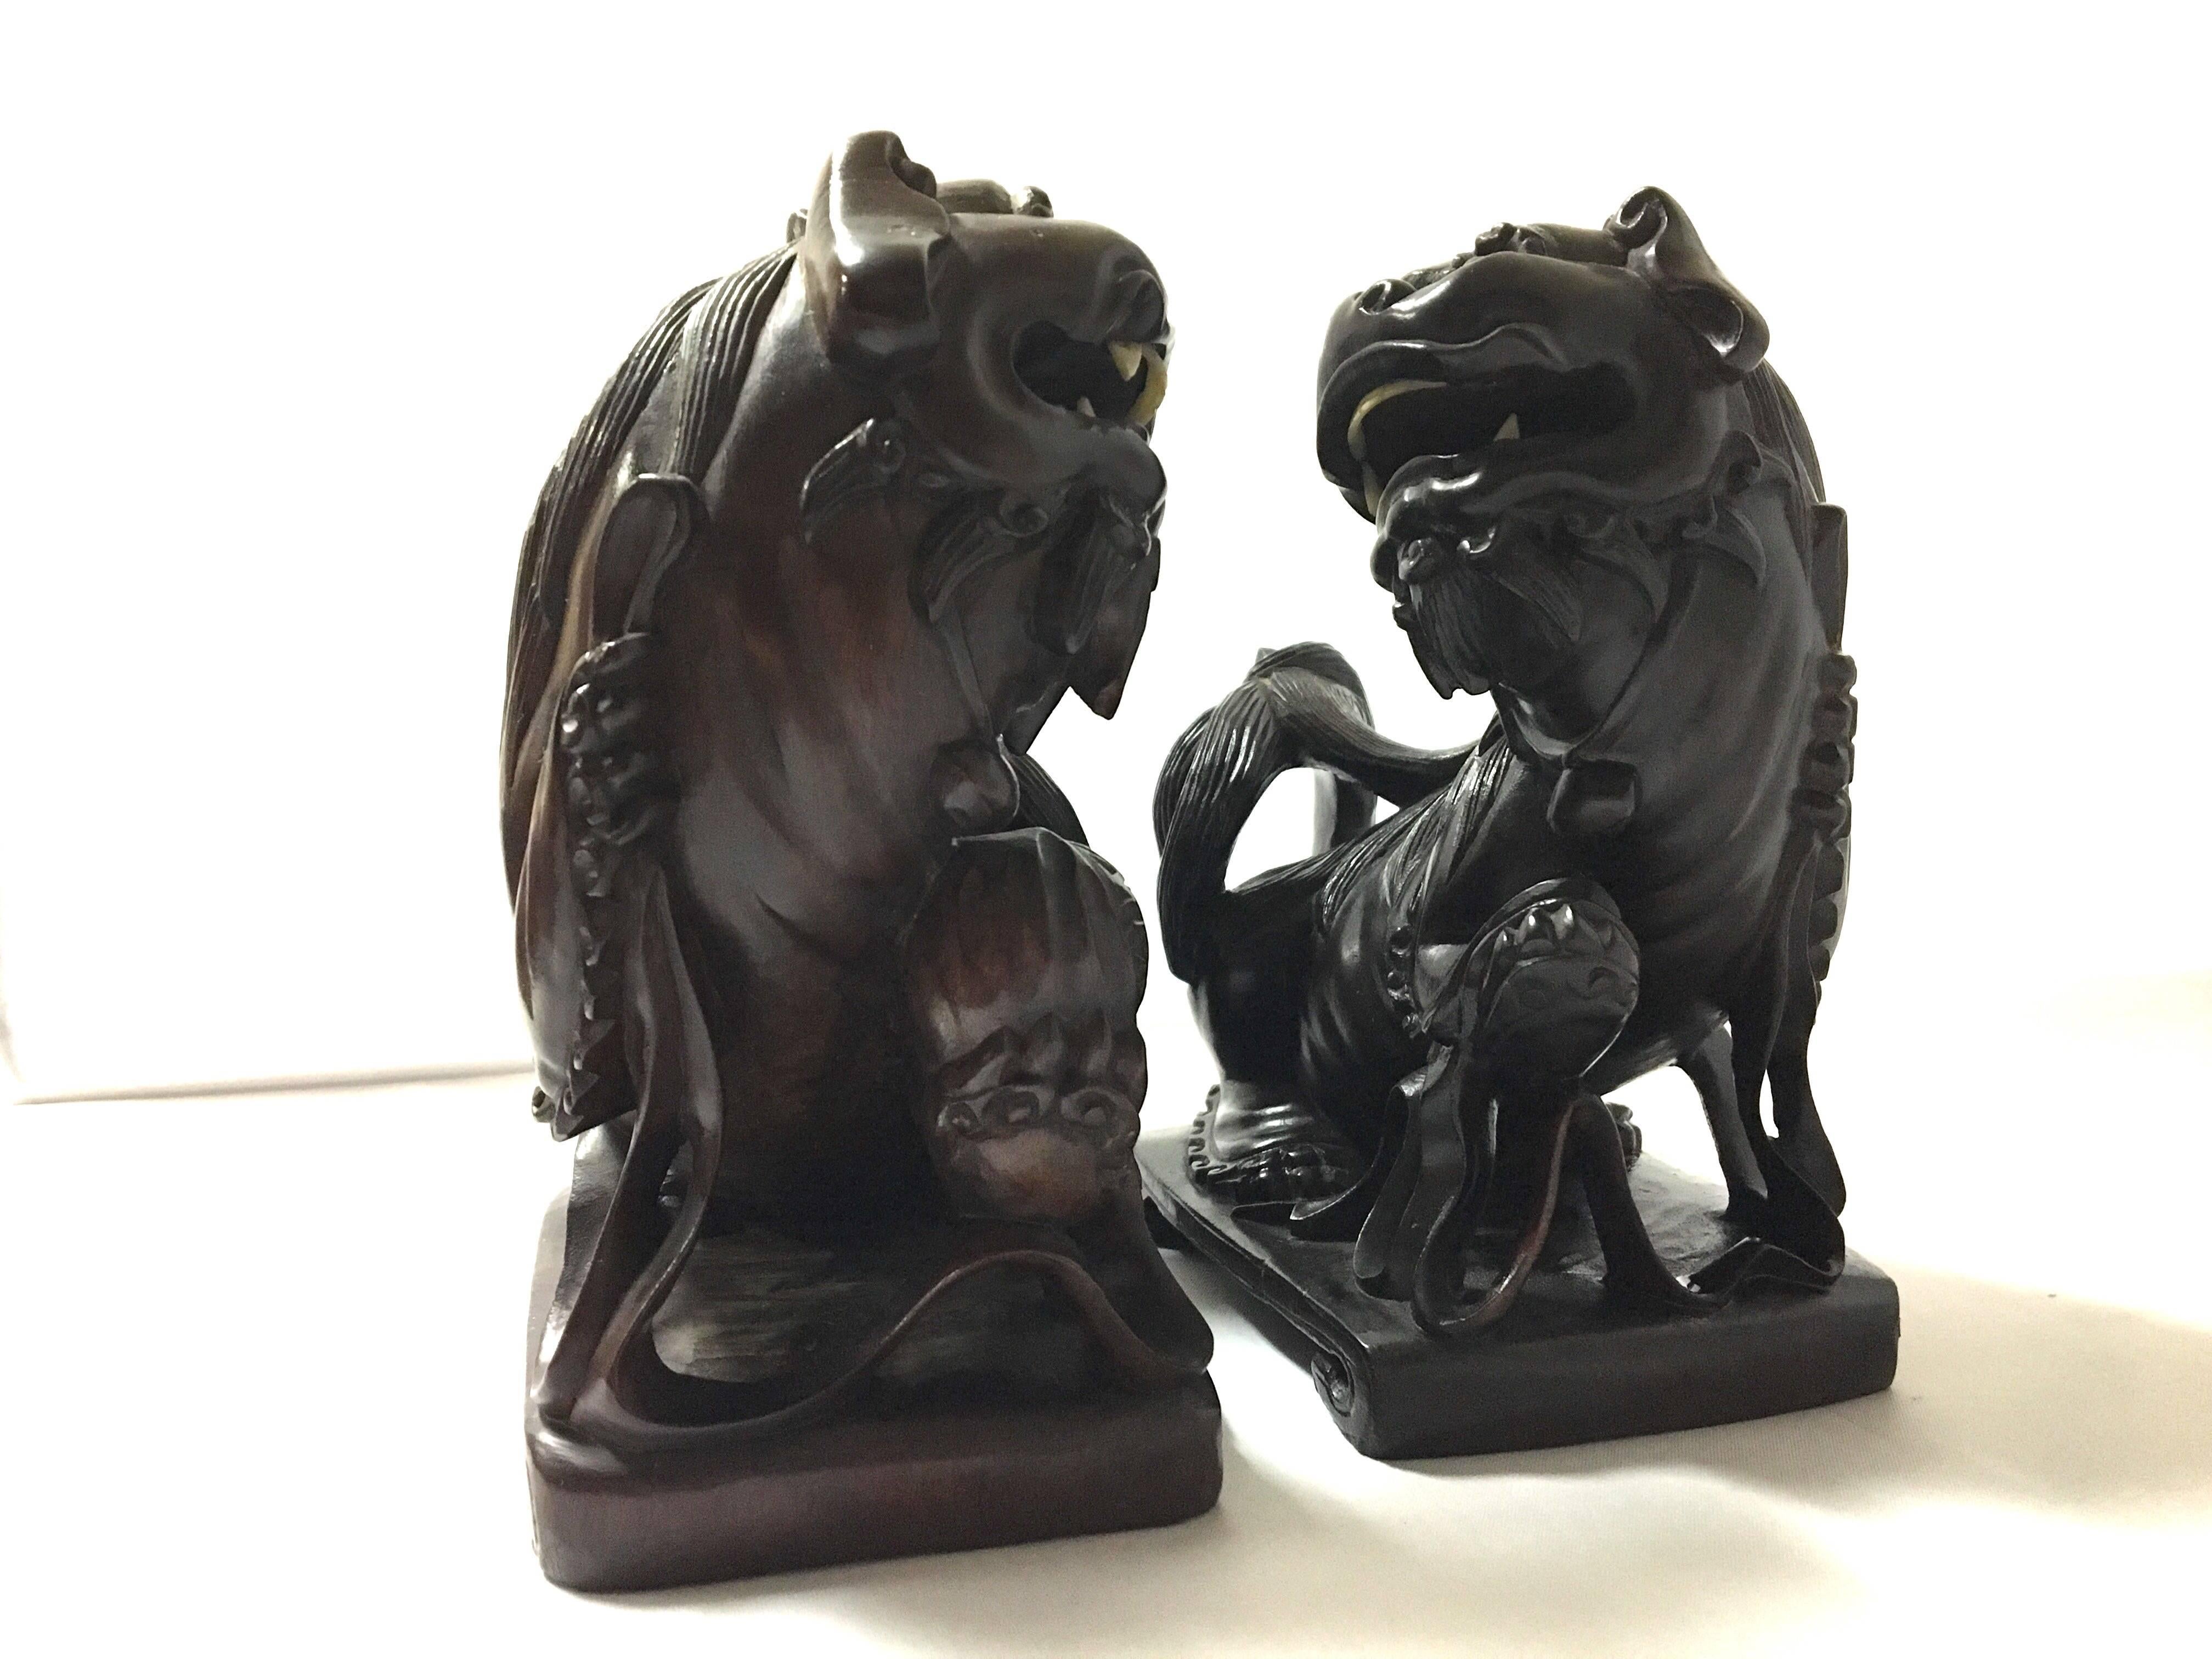 A very nice pair of vintage hand-carved Chinese foo dogs or lions bookends which I believe are hand-carved from rosewood. Excellent condition.